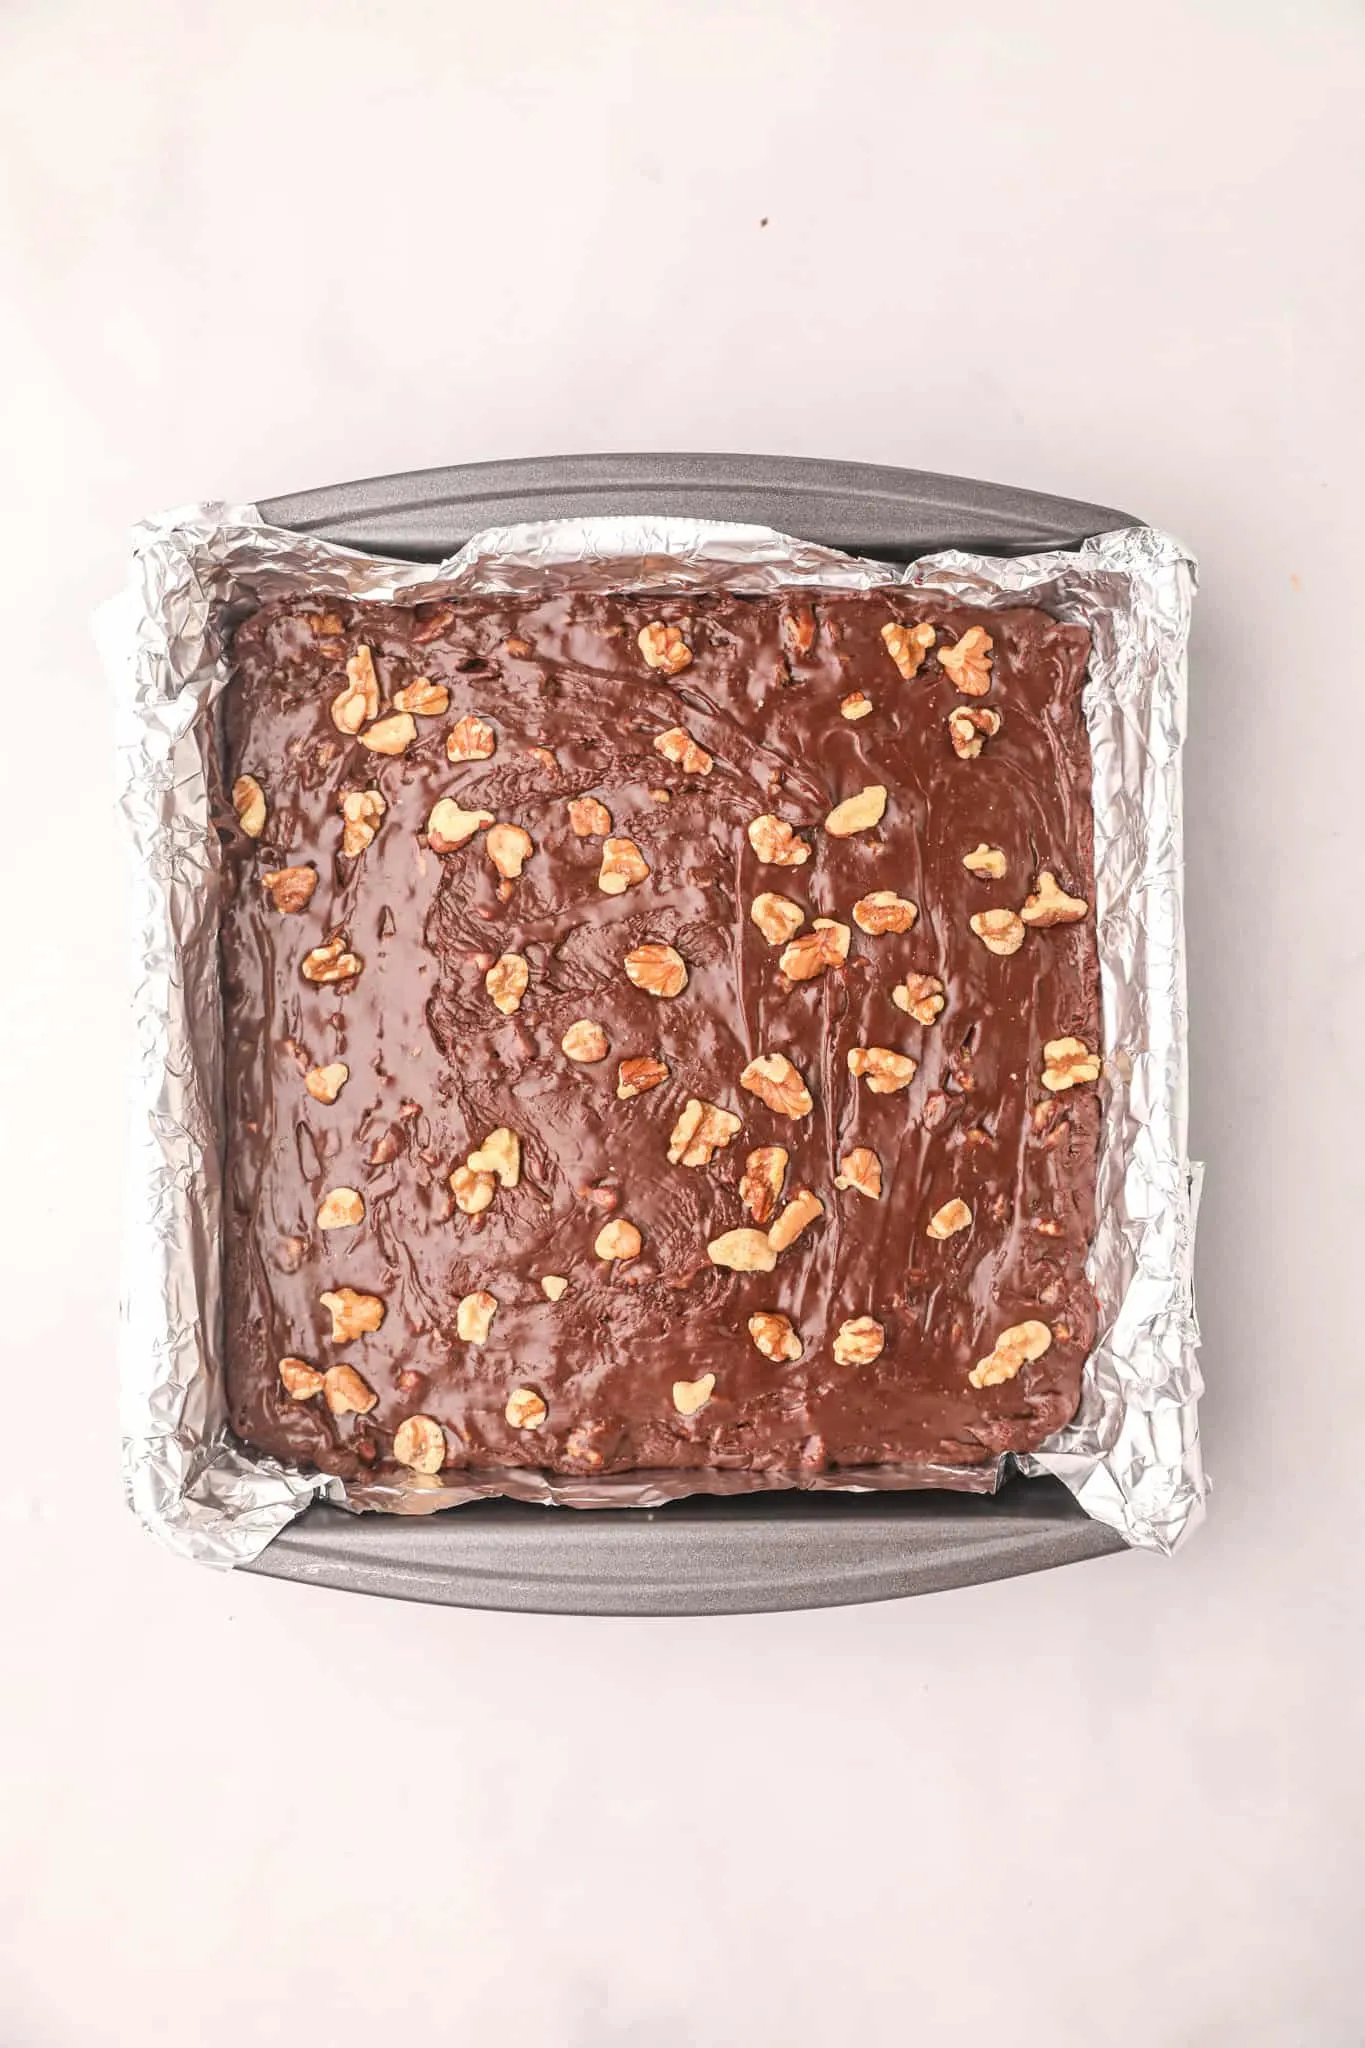 chopped walnuts sprinkled on top of chocolate fudge mixture in a foil lined pan